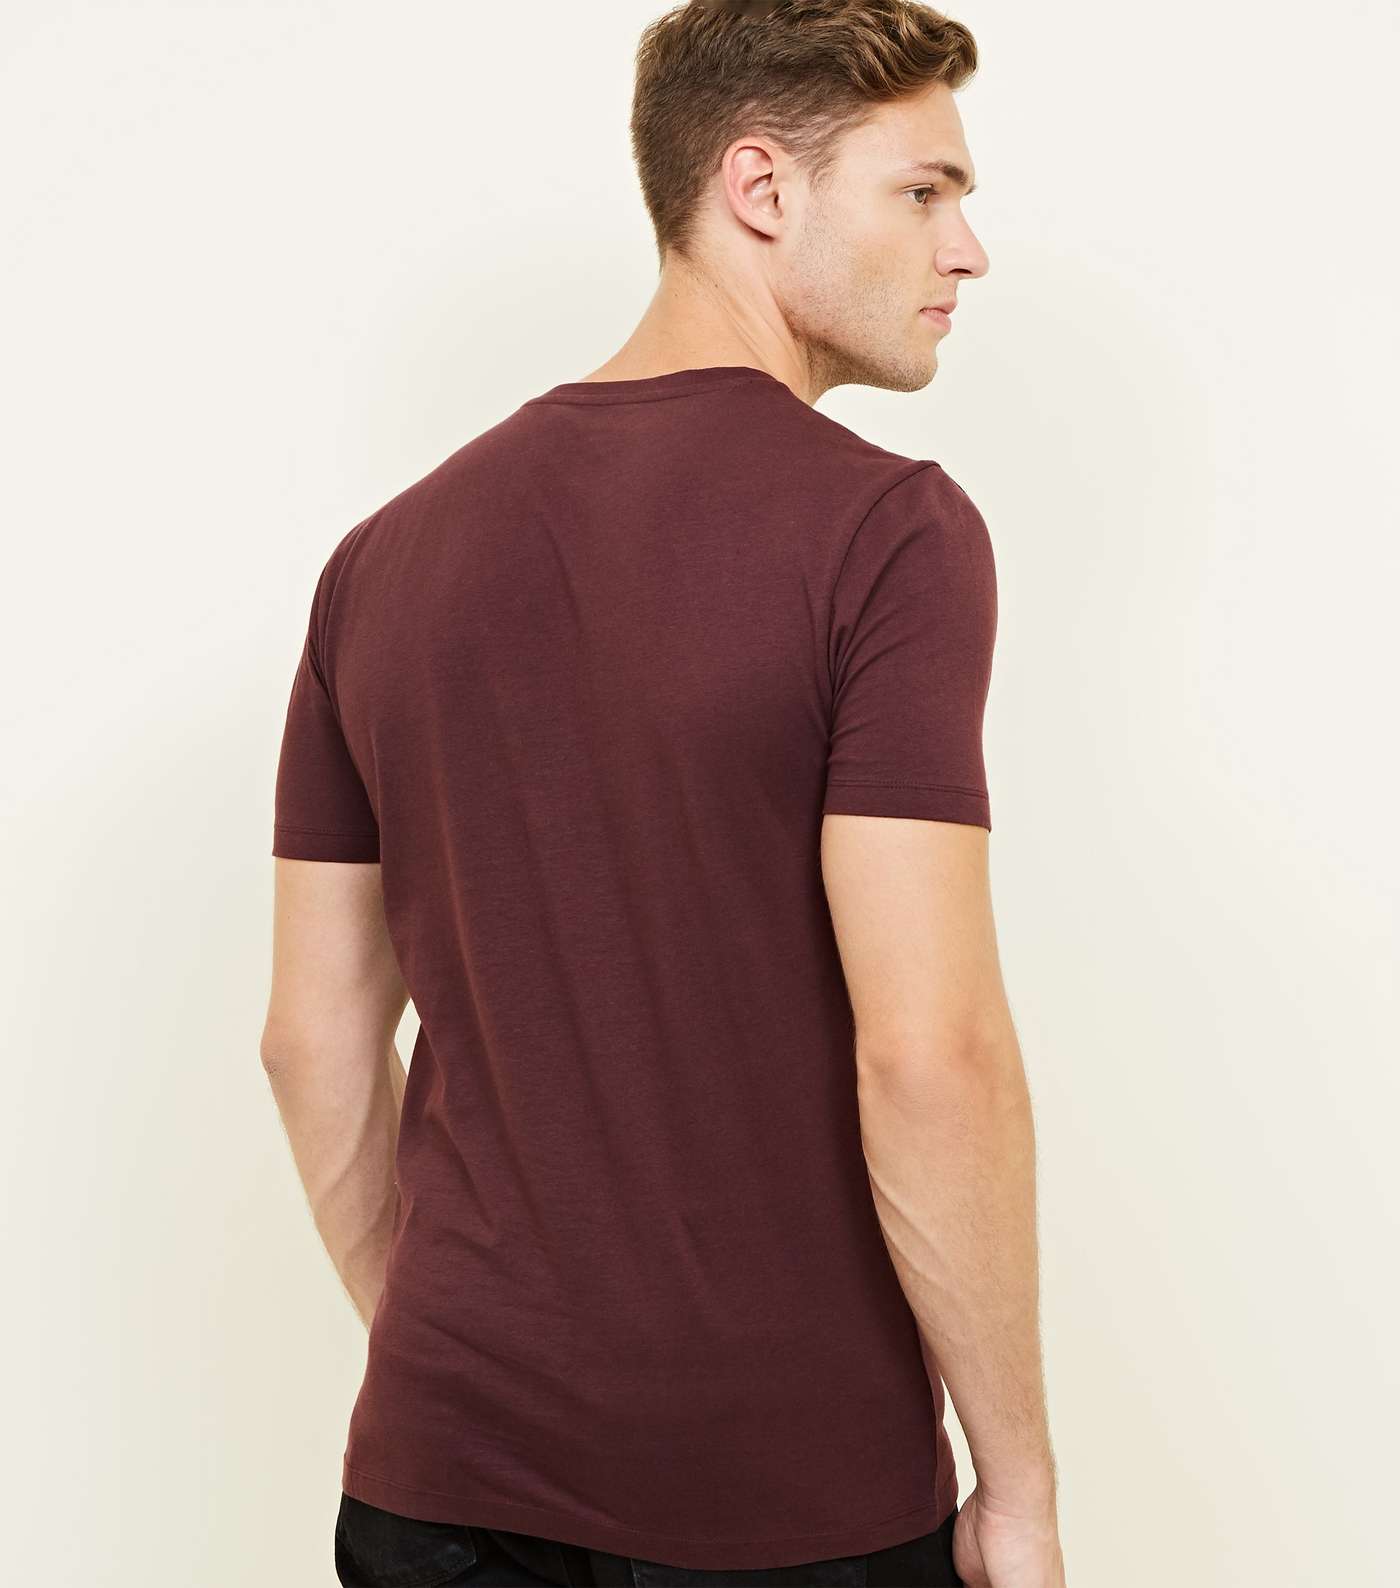 Burgundy Short Sleeve Muscle Fit T-Shirt Image 3